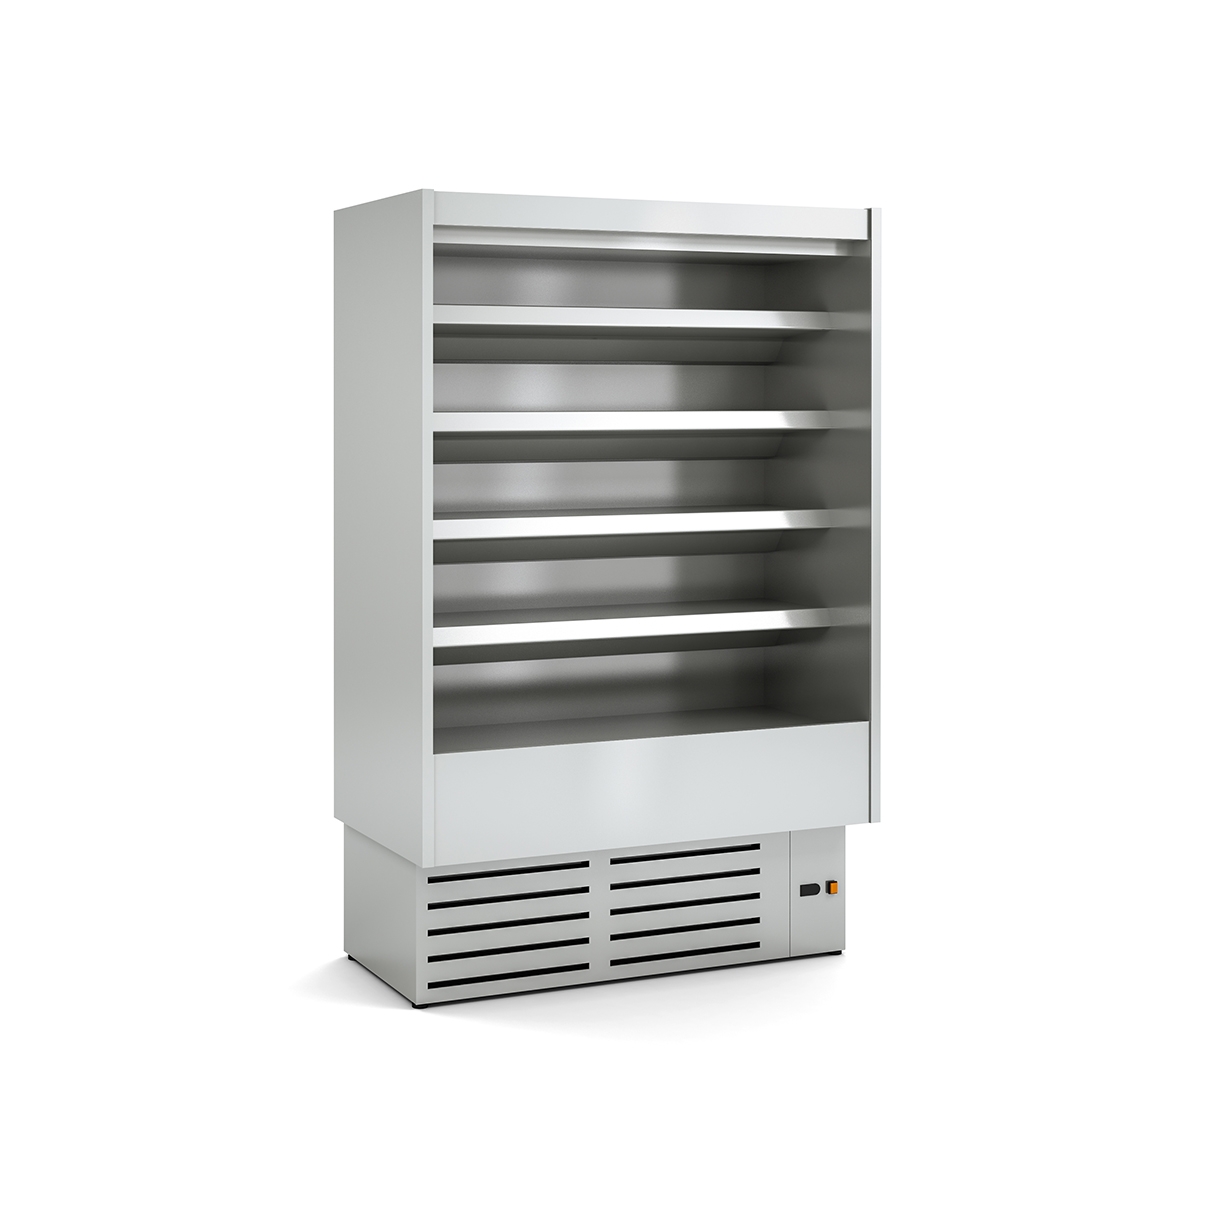 REFRIGERATED WALL-MOUNTED DISPLAY CABINET DS0 I M1-M2